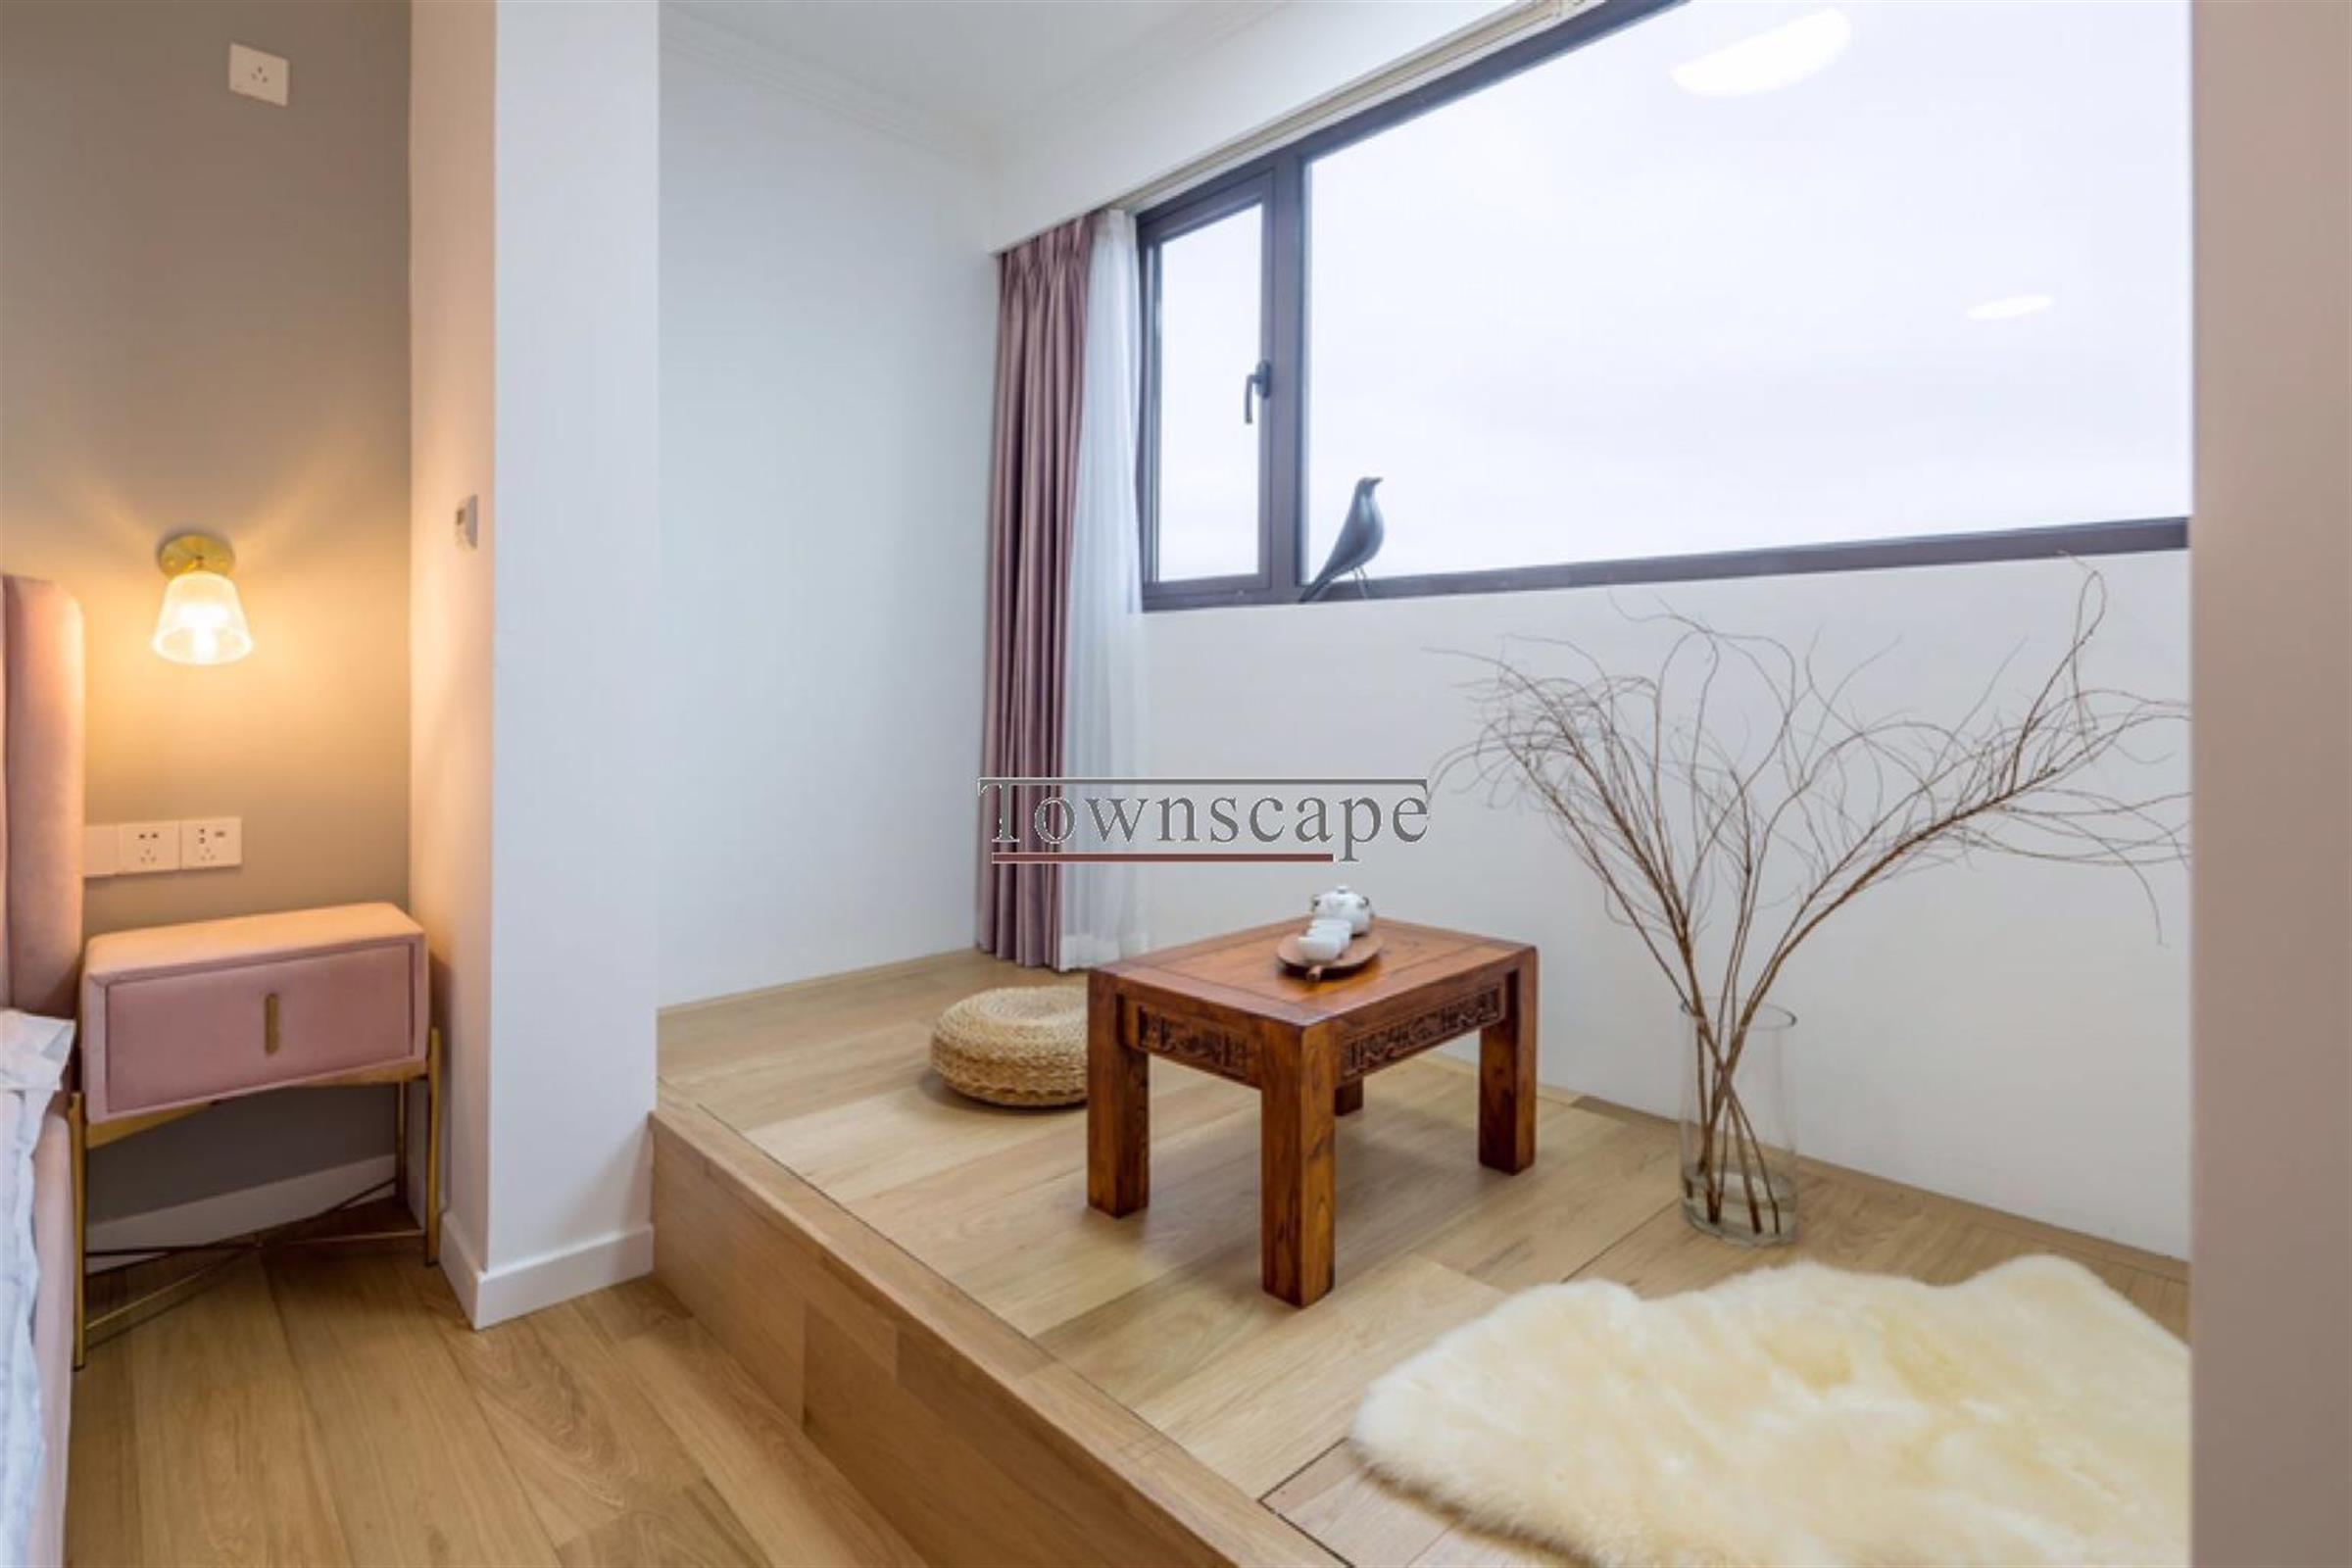 wooden platform Renovated Bright Spacious Modern Apartment for Rent in Downtown Zhengning Rd